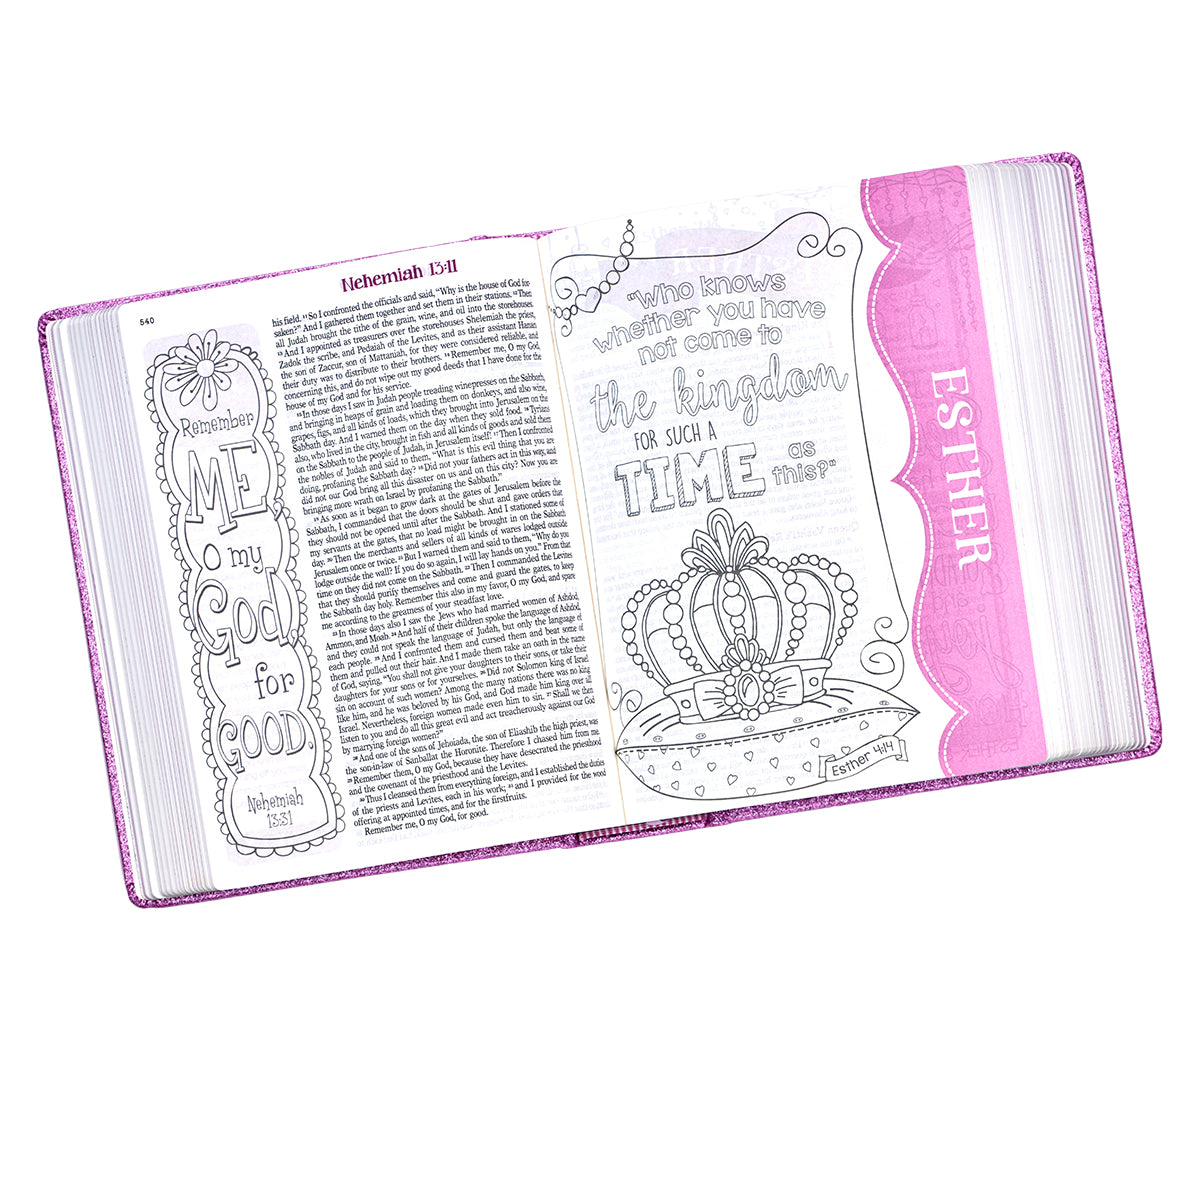 Image of My Creative Bible Purple Glitter Hardcover other